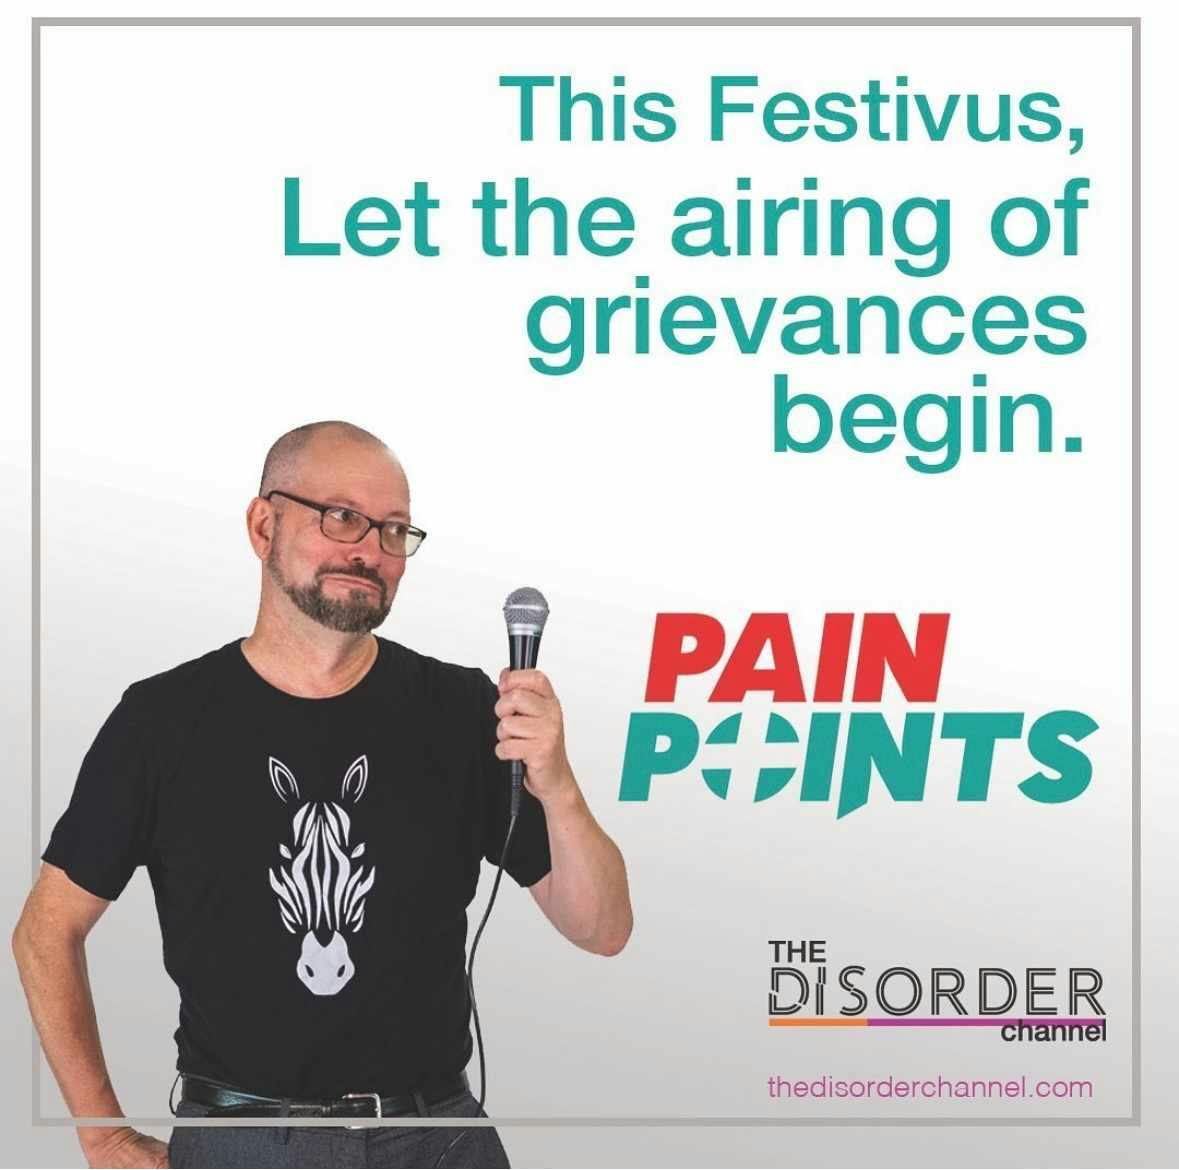 Pain Points on the Disorder Channel with Daniel DeFabio and Bo Bigelow -This Festivus, Let the Airing of Grievances Begin